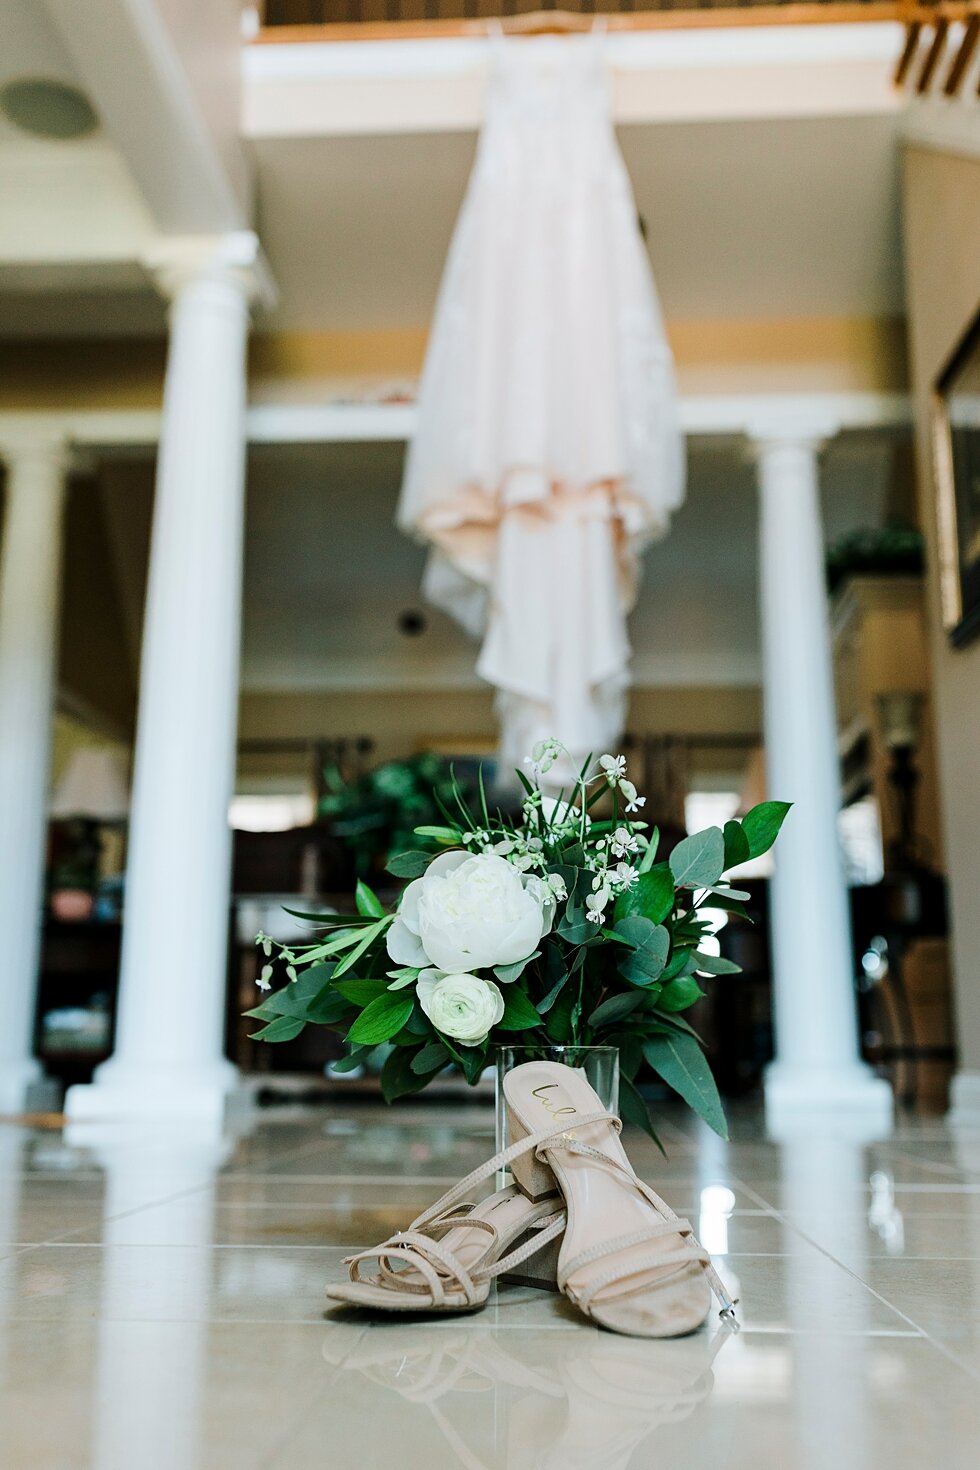  Wedding dress complete with bridal bouquet and wedding shoes for the bride to wear down the aisle on her special day. Romantic casual lace wedding gown close friends neutral colors background wedding natural greenery crisp white #midwestphotographer